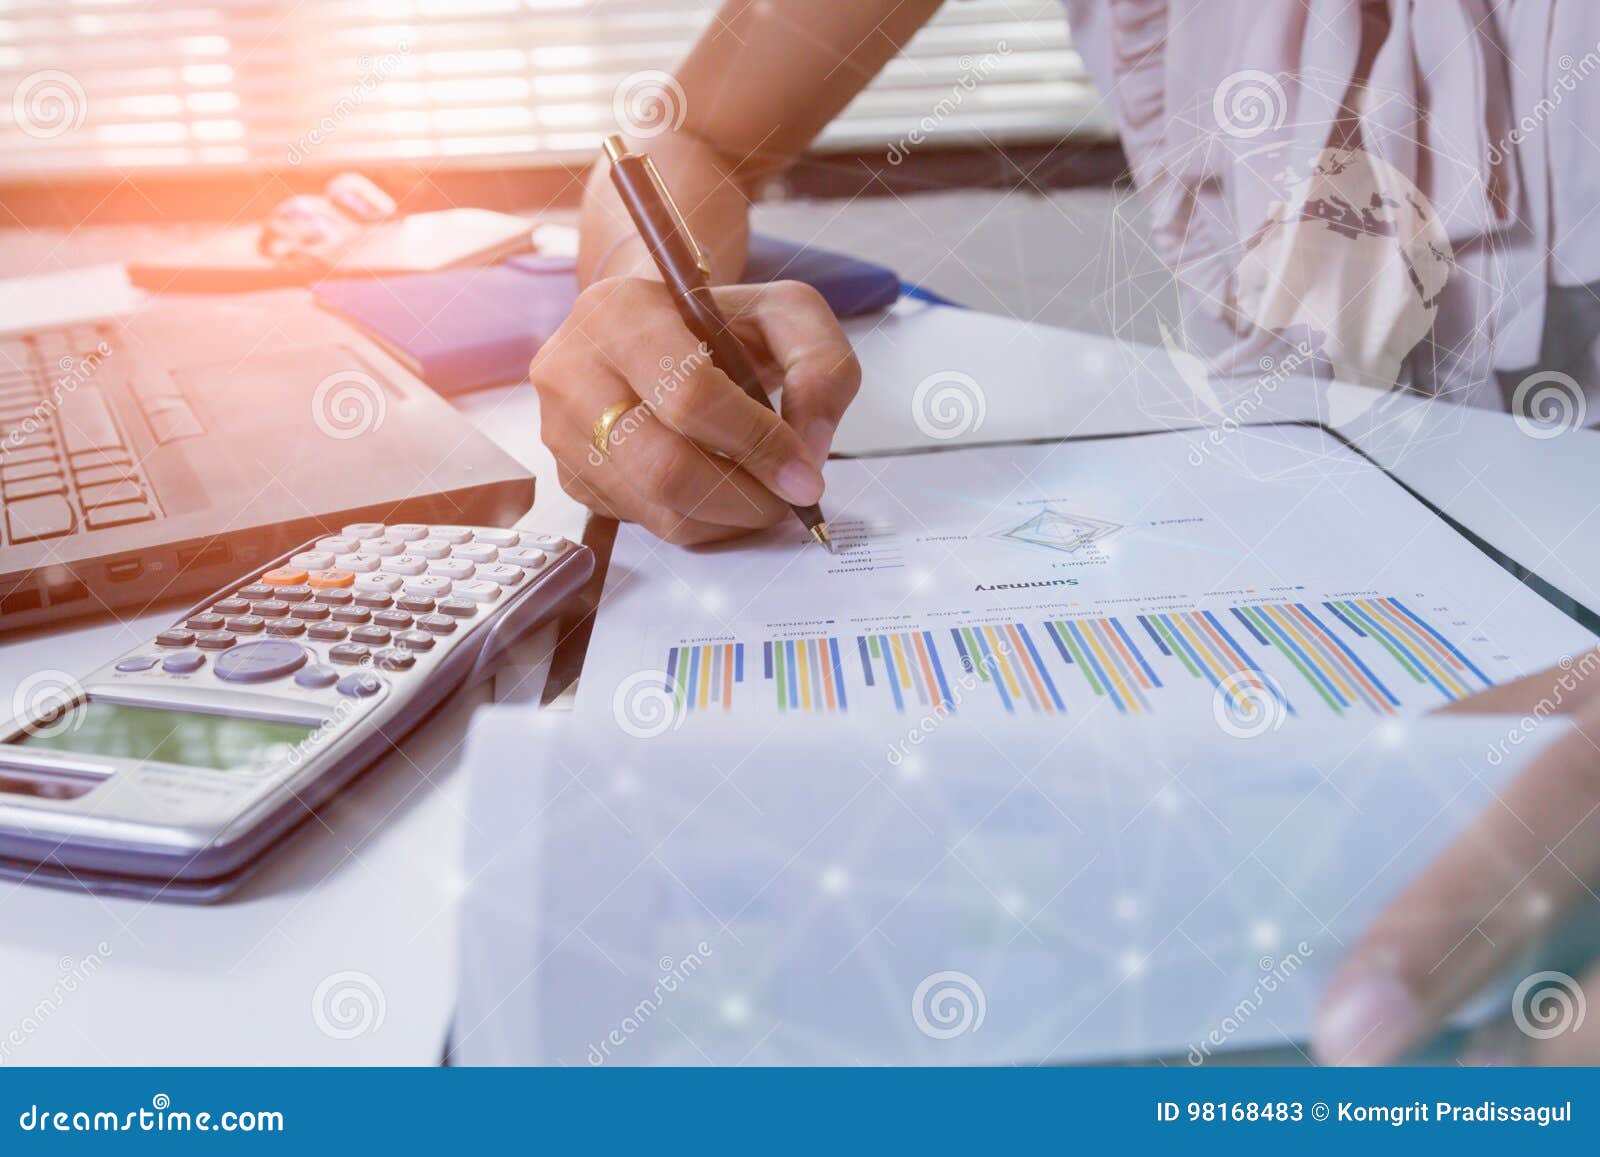 double exposure business people working at office. stock markets financial or investment strategy background business chart